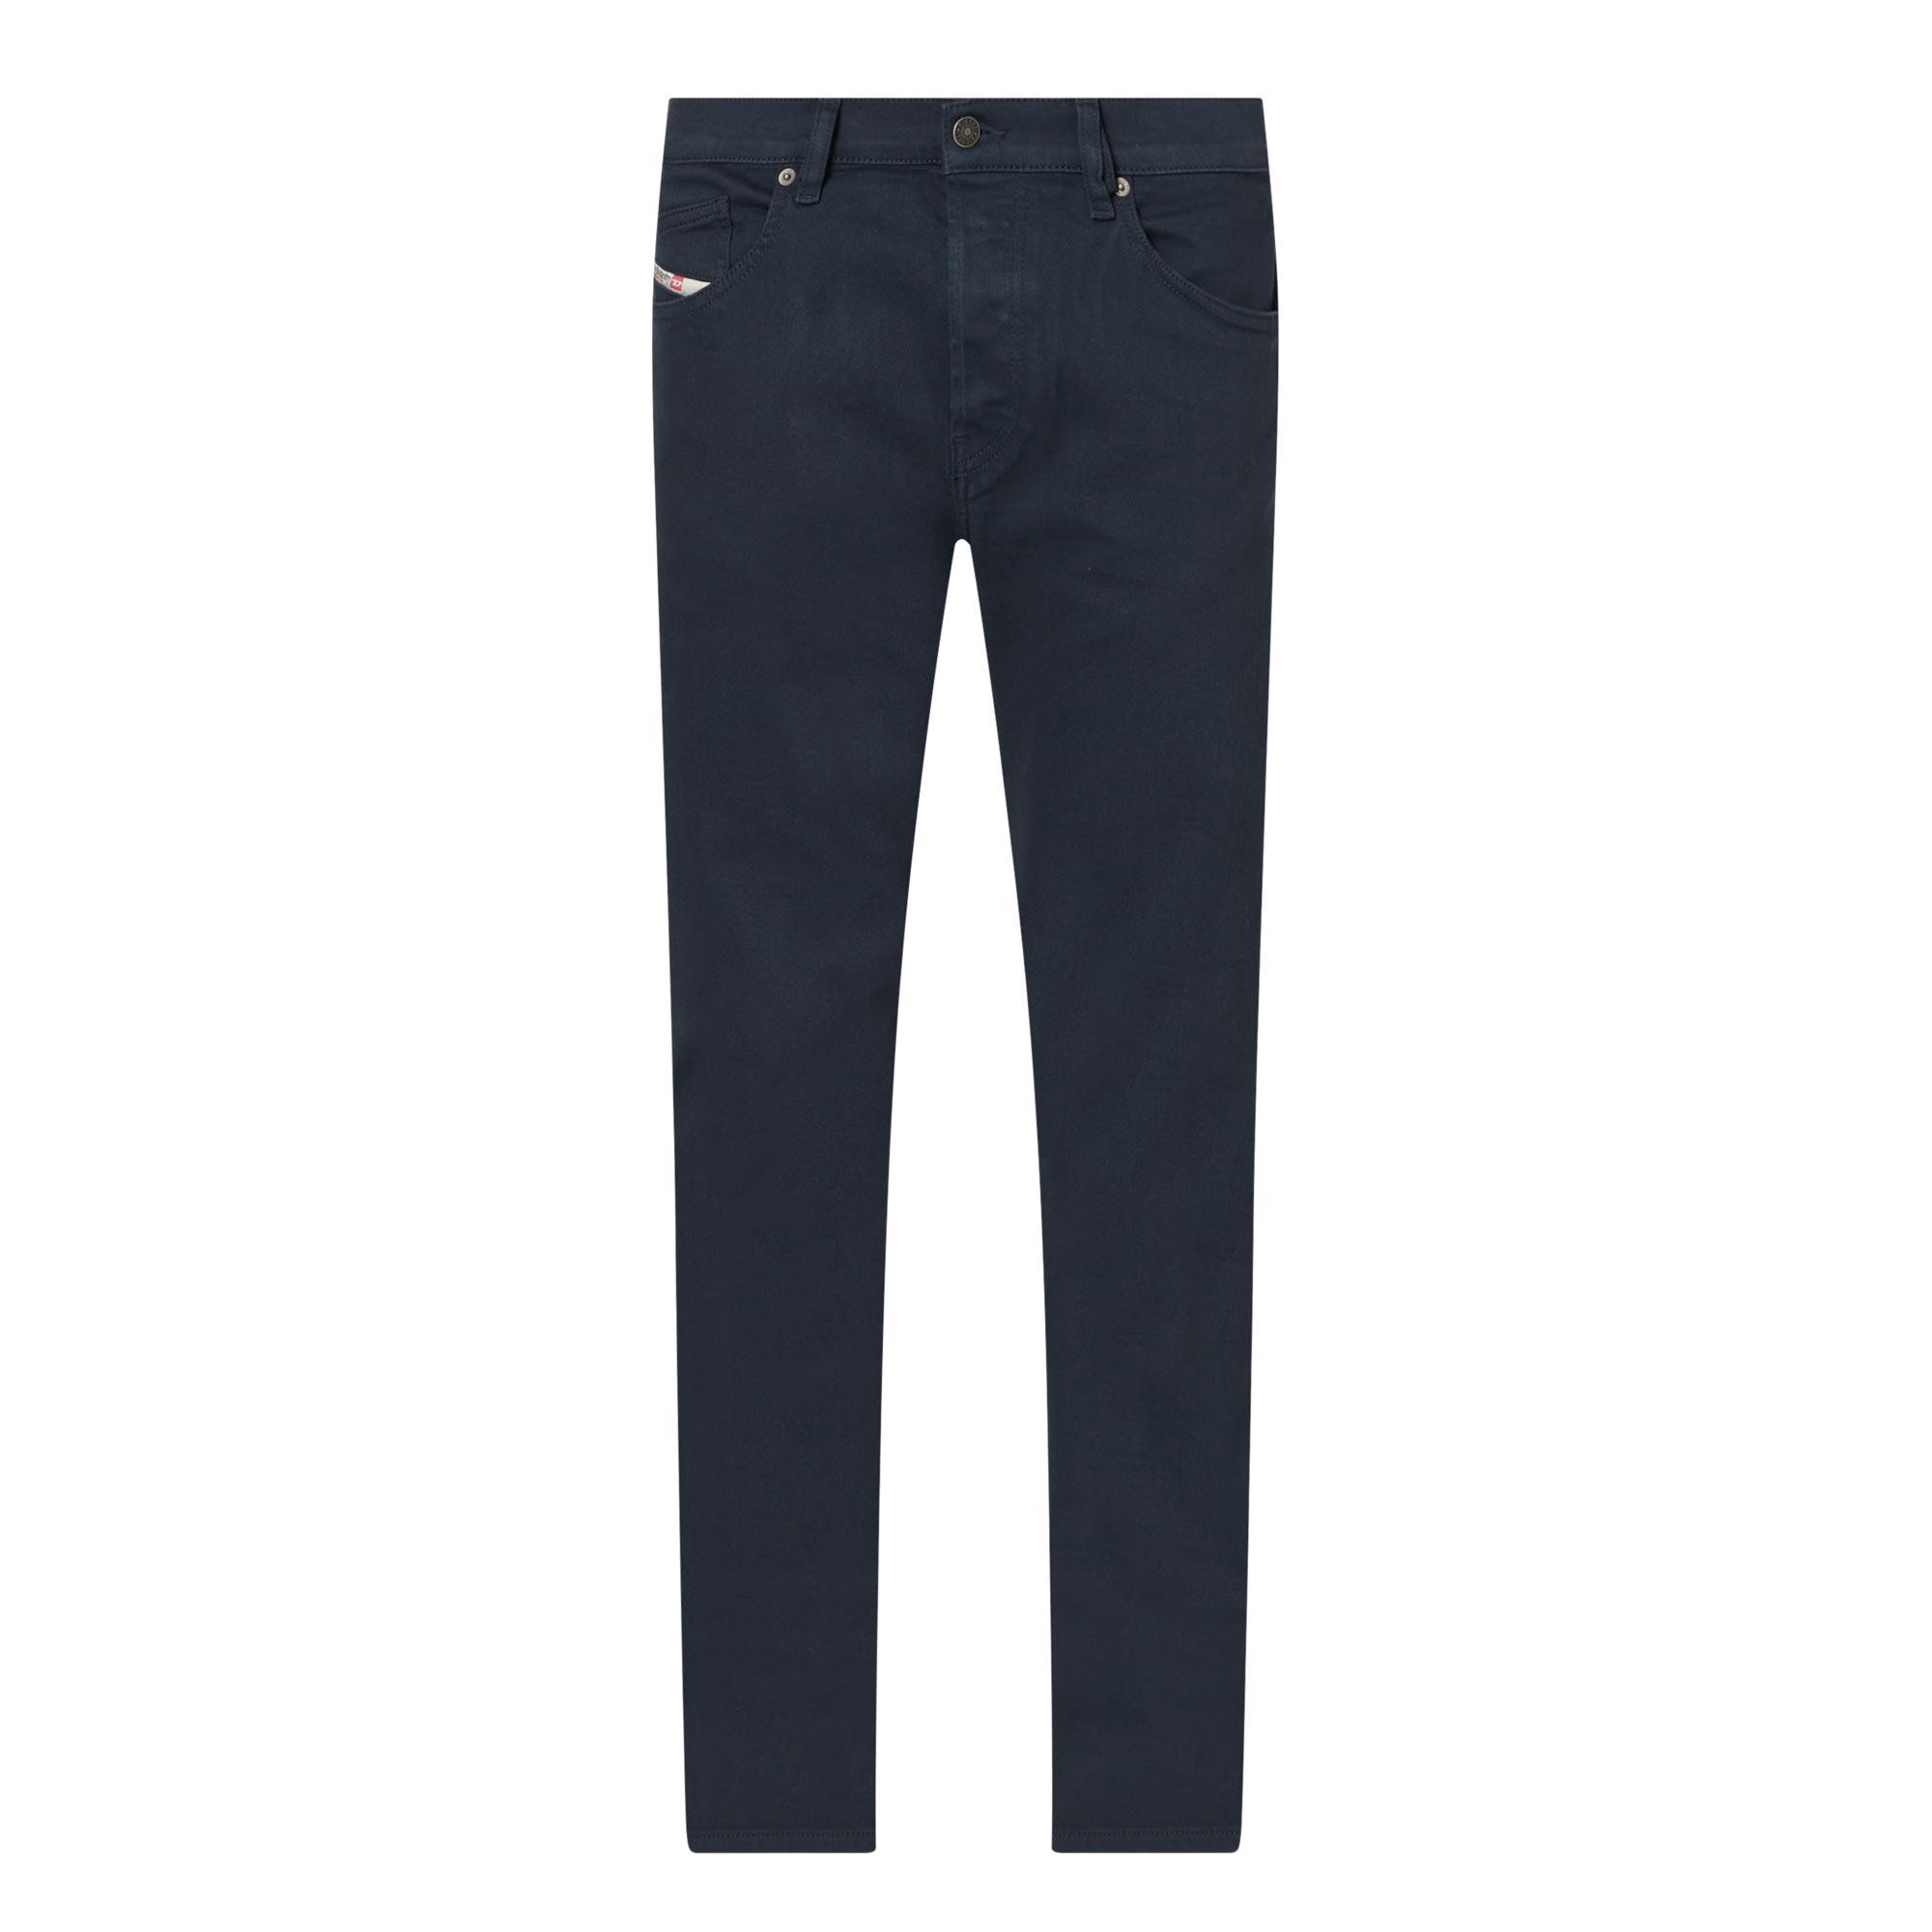 Mihtry Mid-Rise Straight Leg Jeans